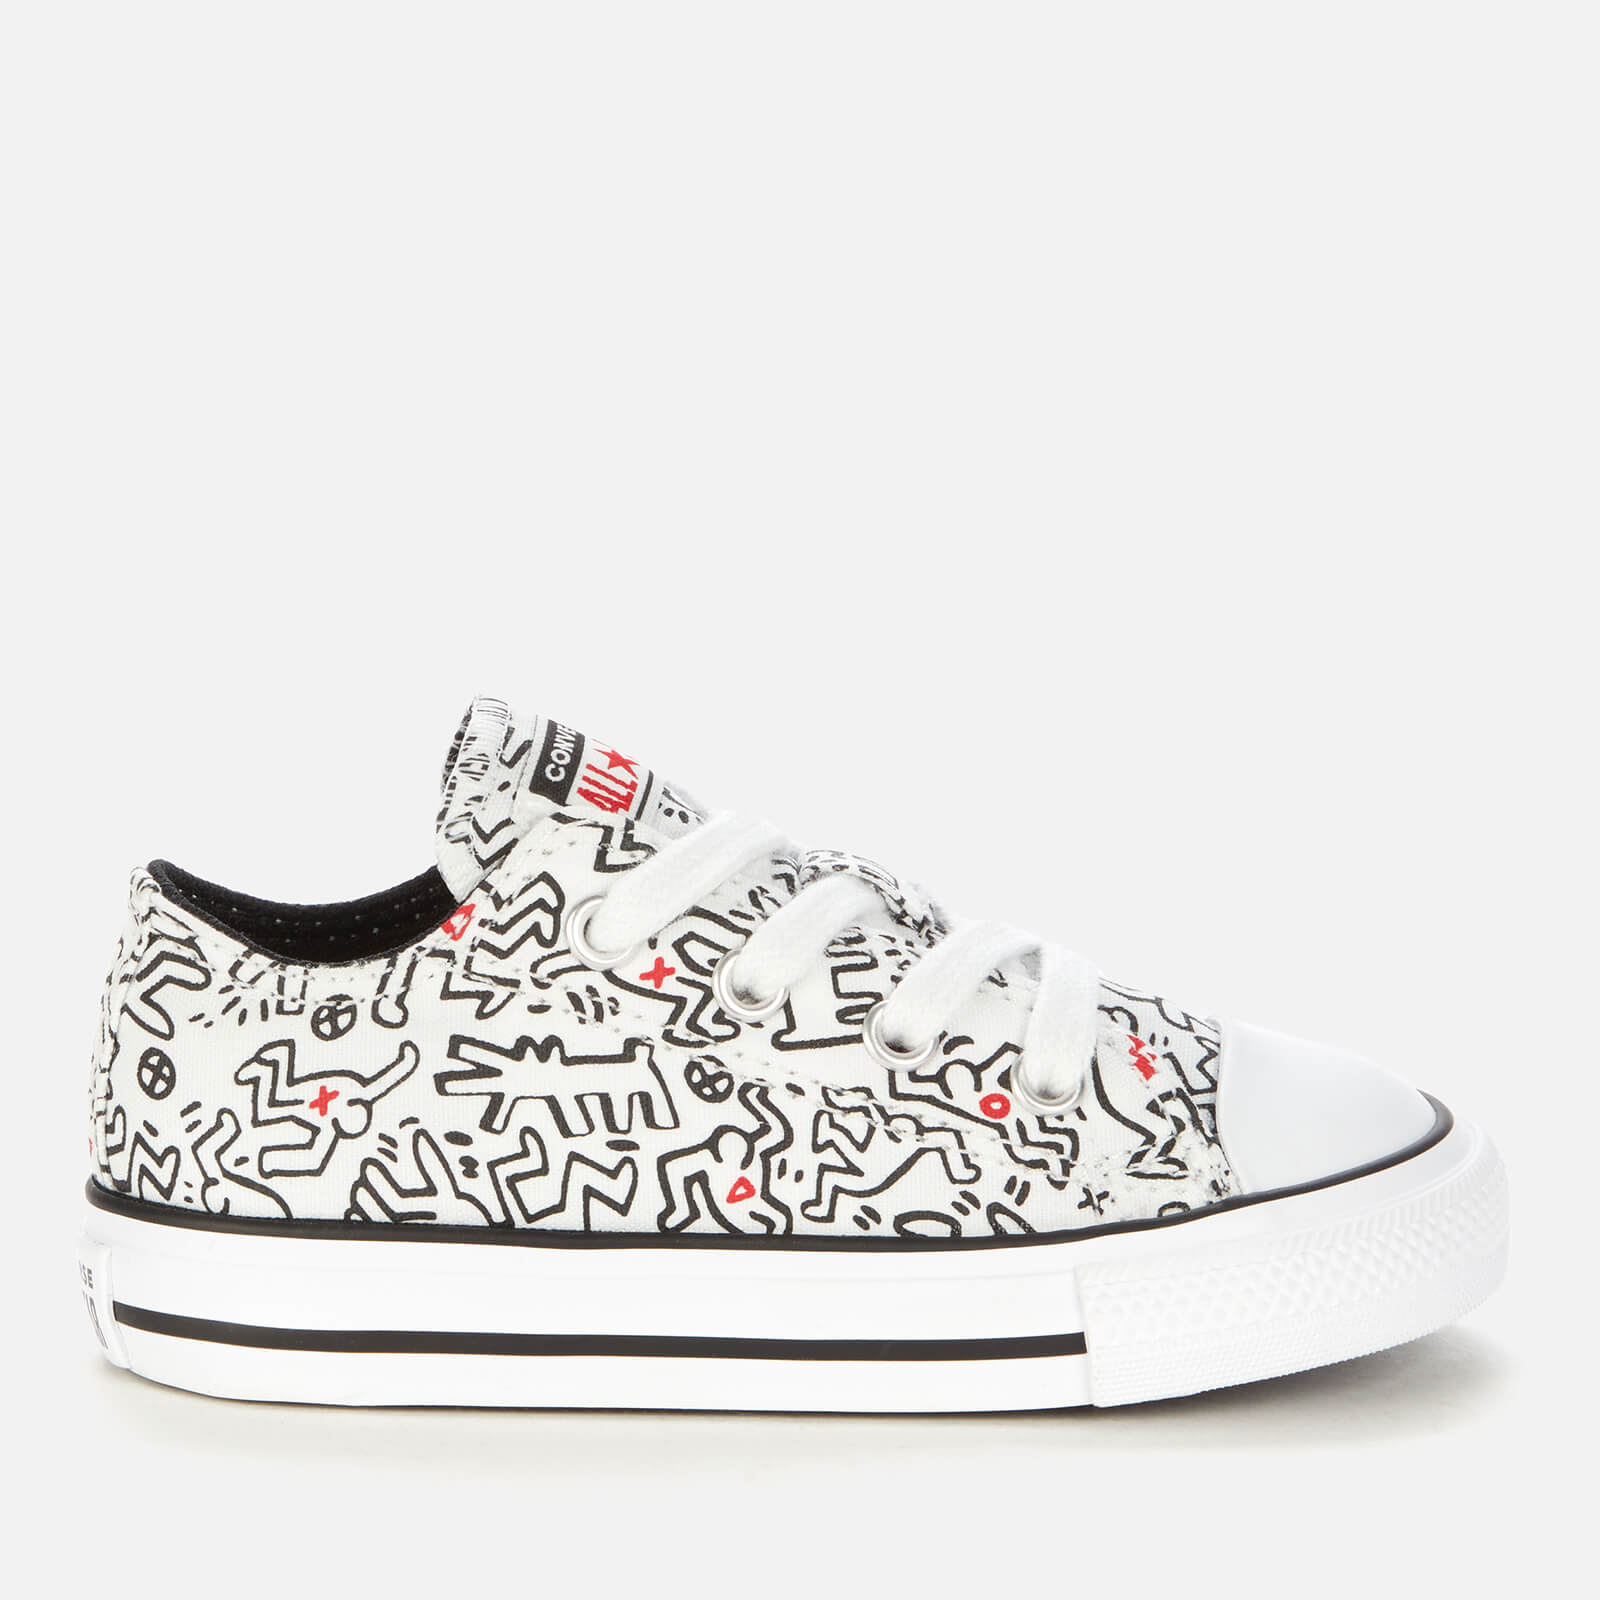 Converse Toddlers' Keith Haring Chuck Taylor All Star Ox Trainers - White/Black/Red - UK 4 Toddler